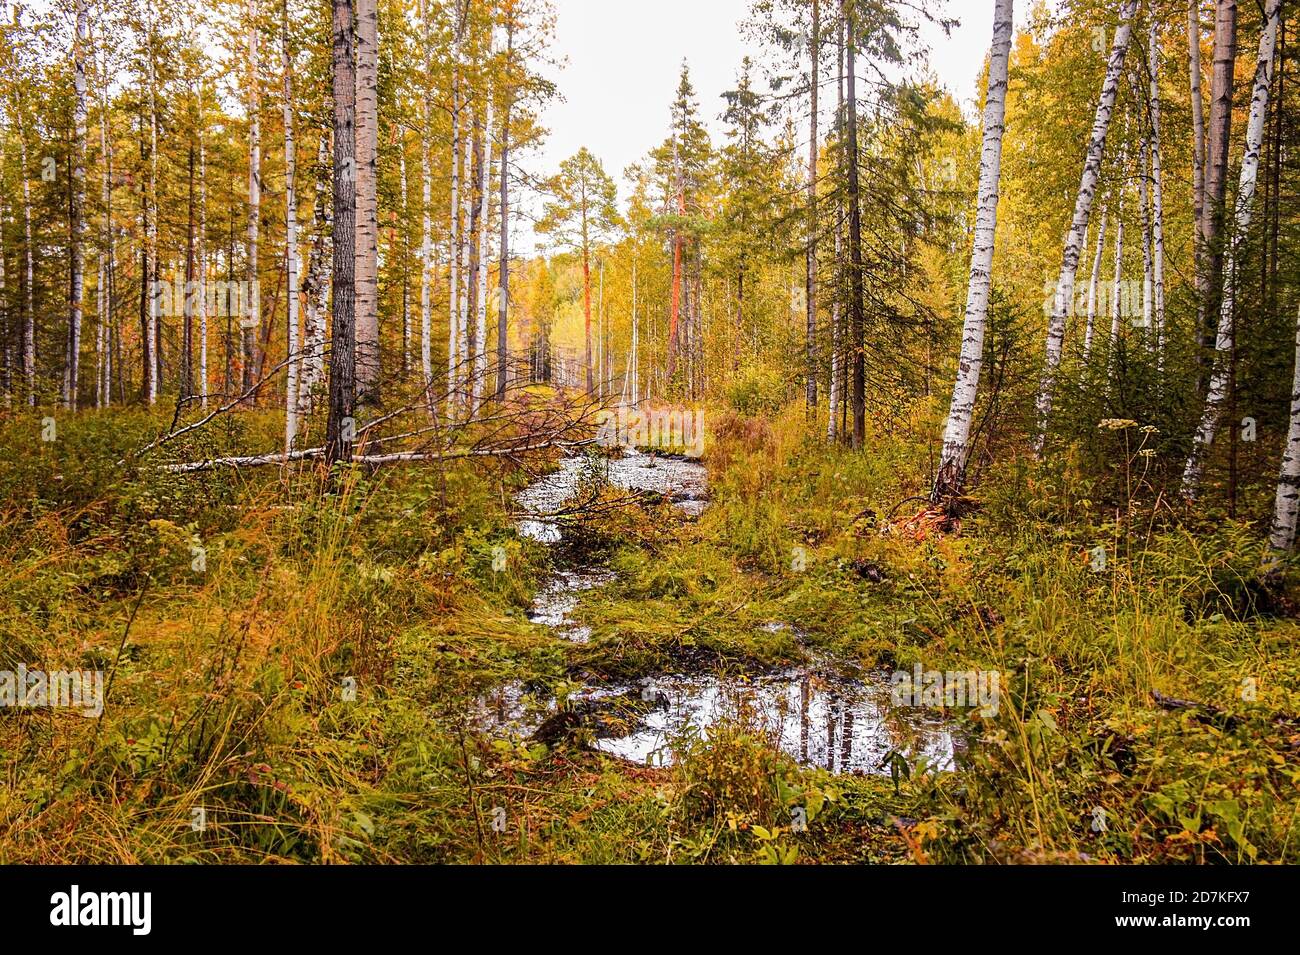 Autumn landscape. Yellow taiga forest with a path and puddles after rain. Stock Photo